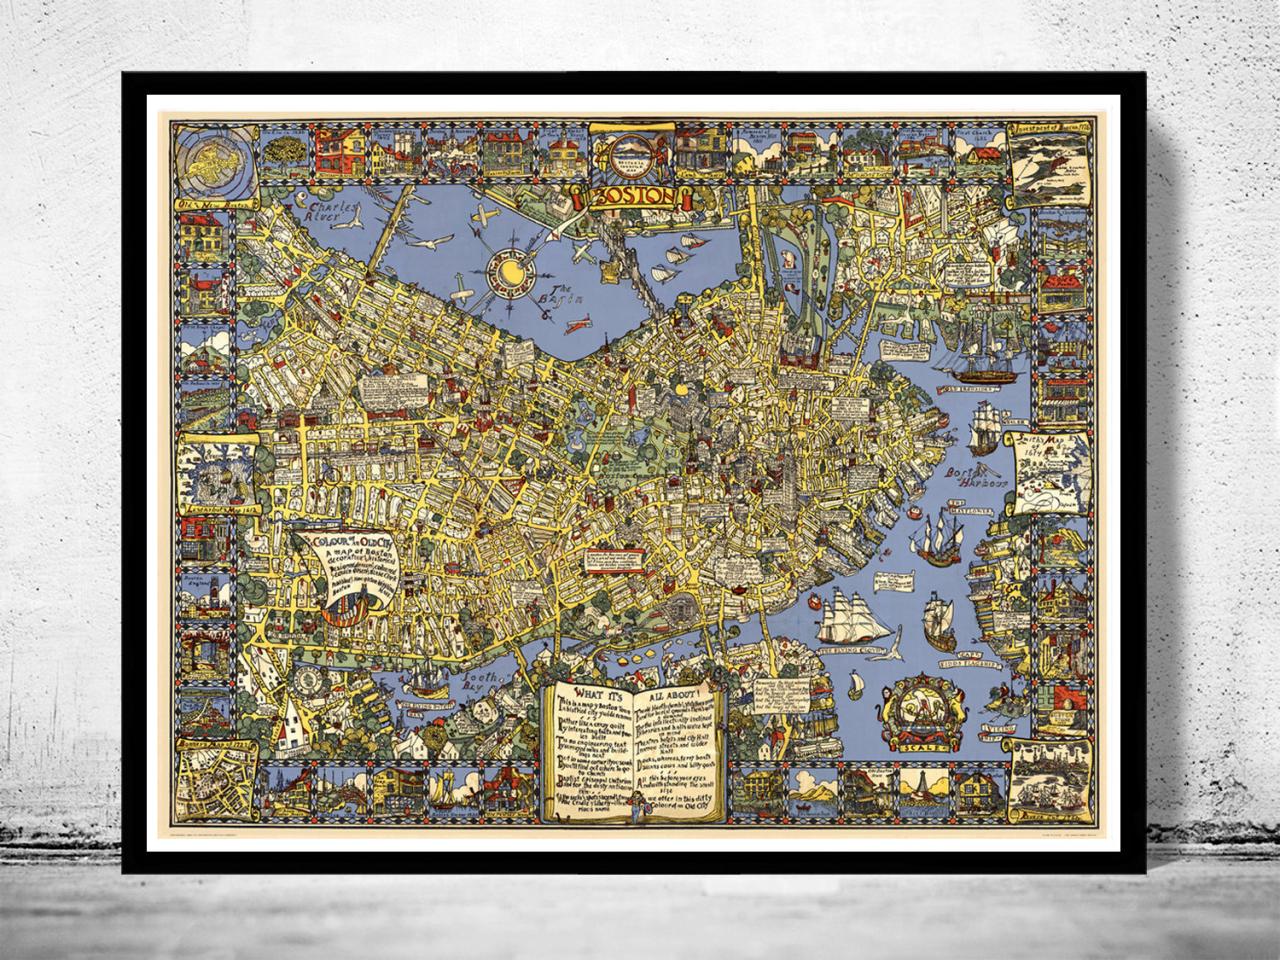 Old Map Of Boston 1926, Massachusetts Pictorial Map